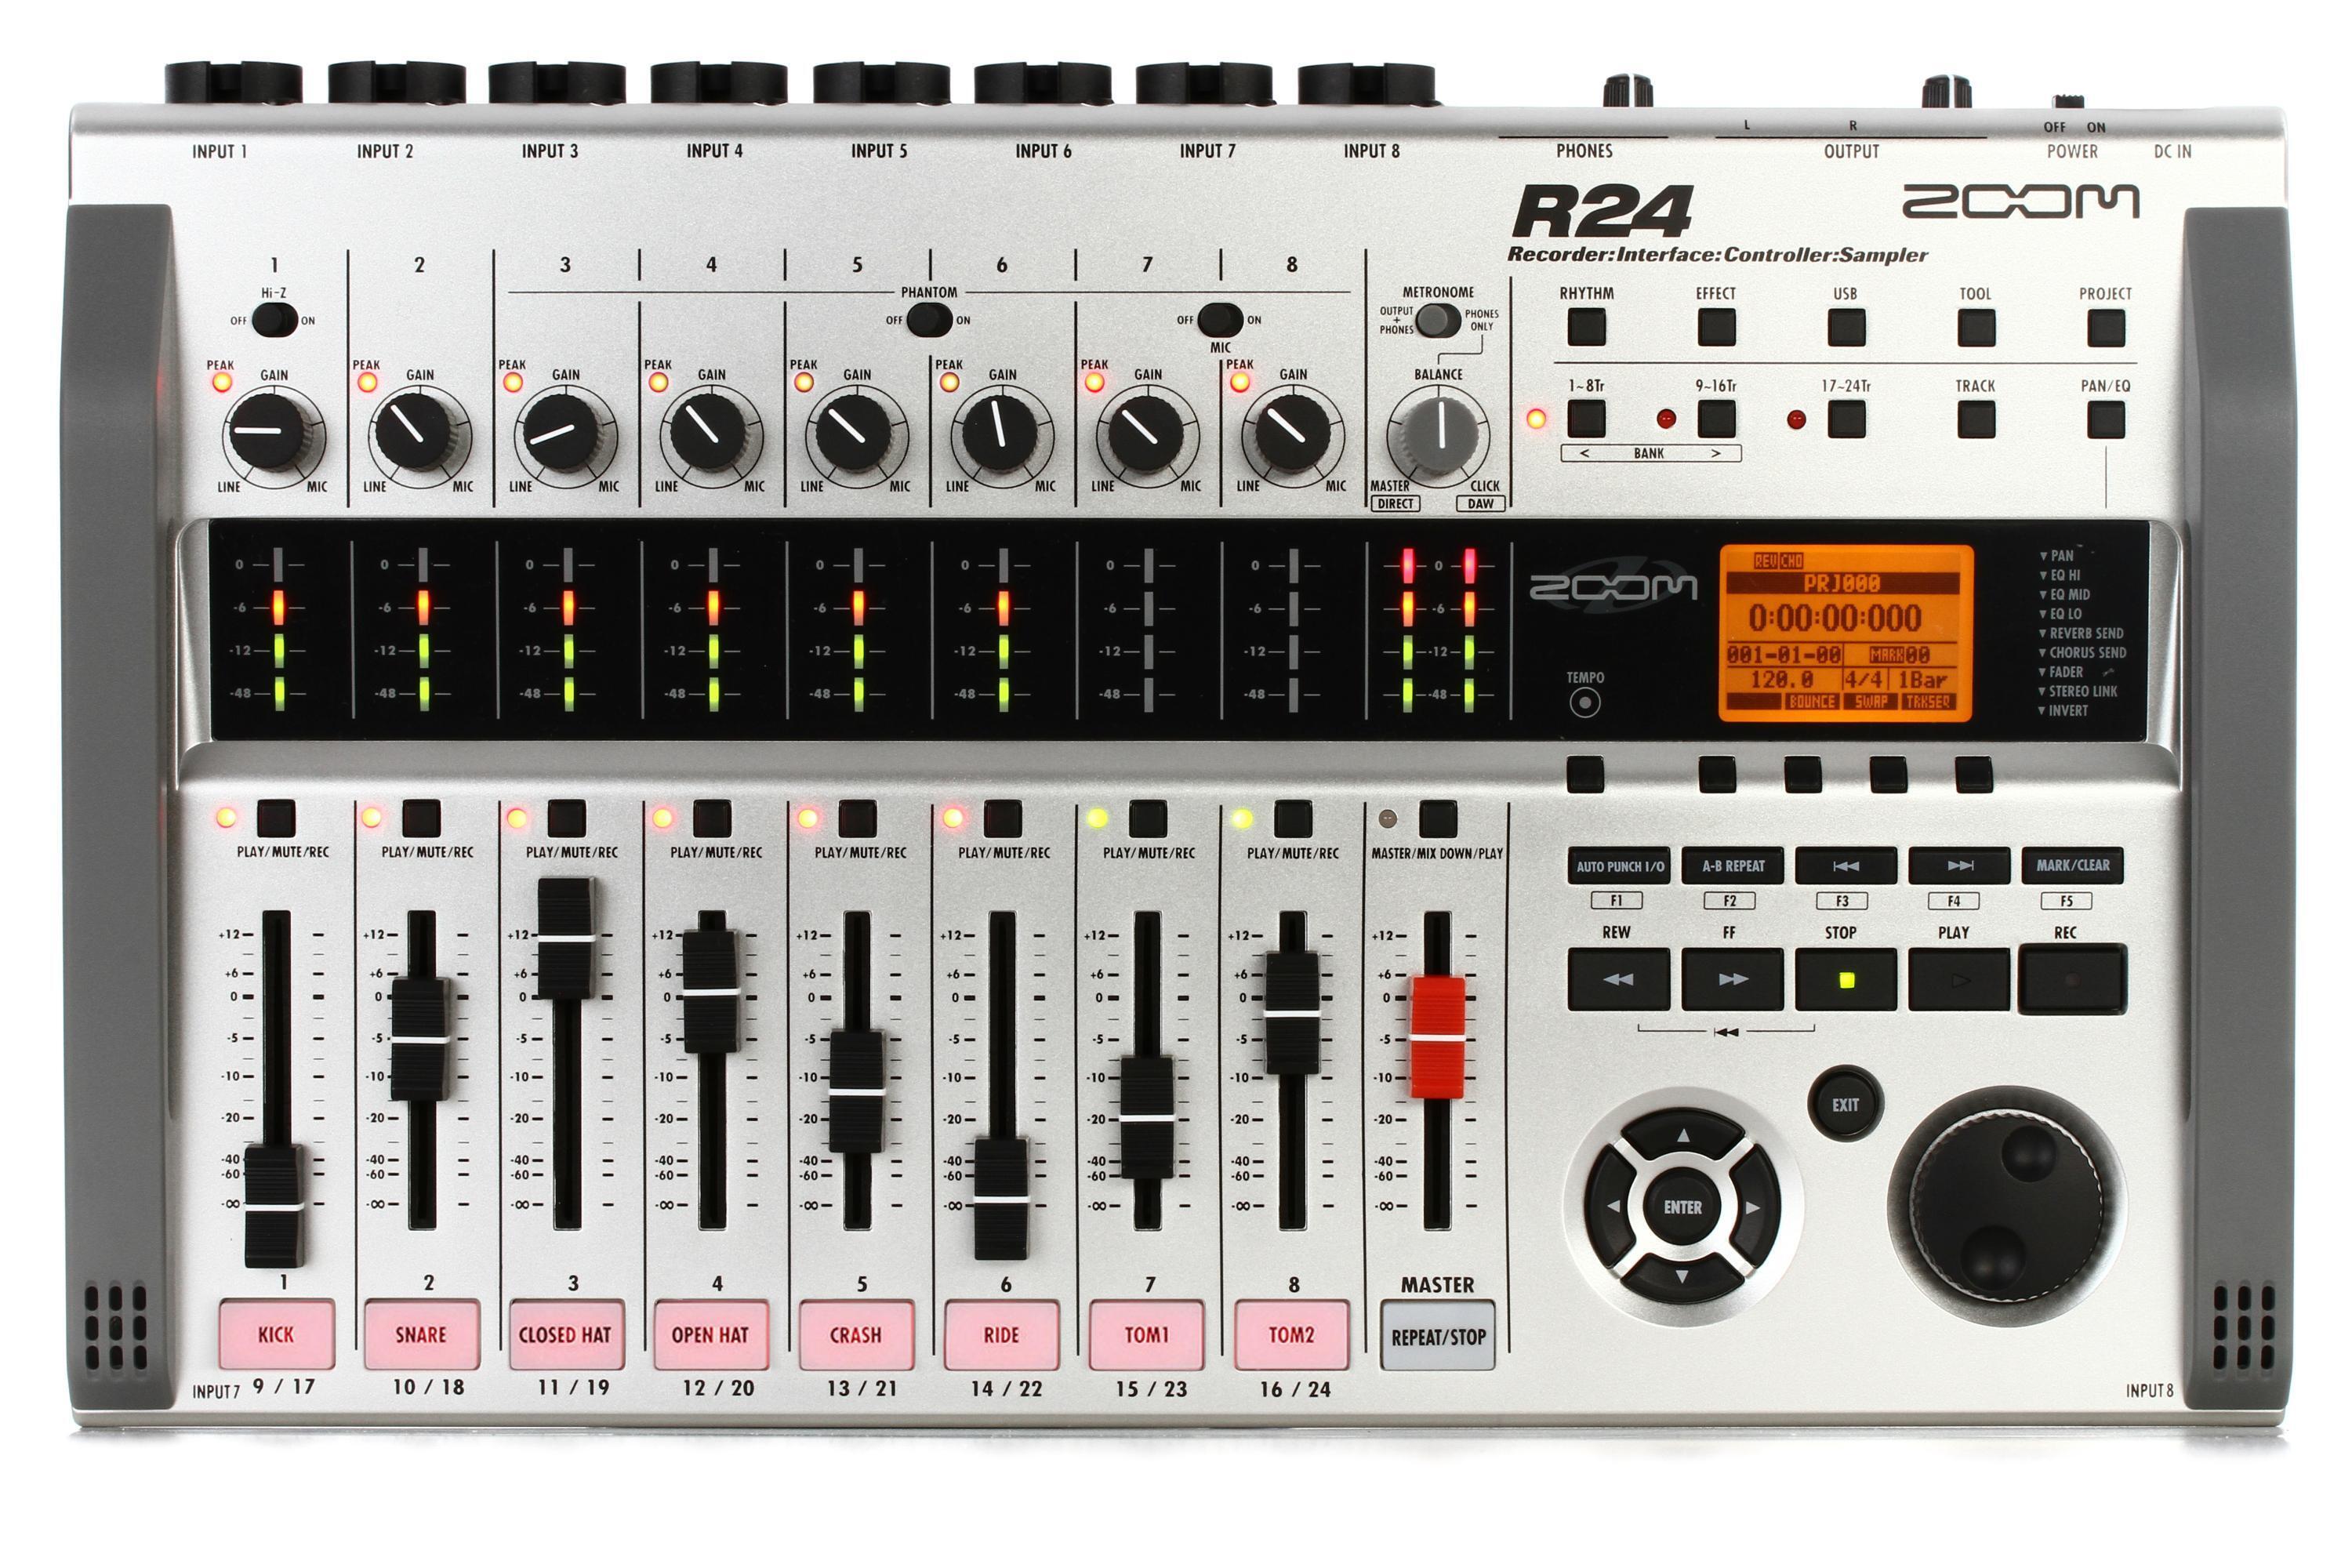 Zoom R24 24-track Recorder / Interface / Controller with Loop Sampler